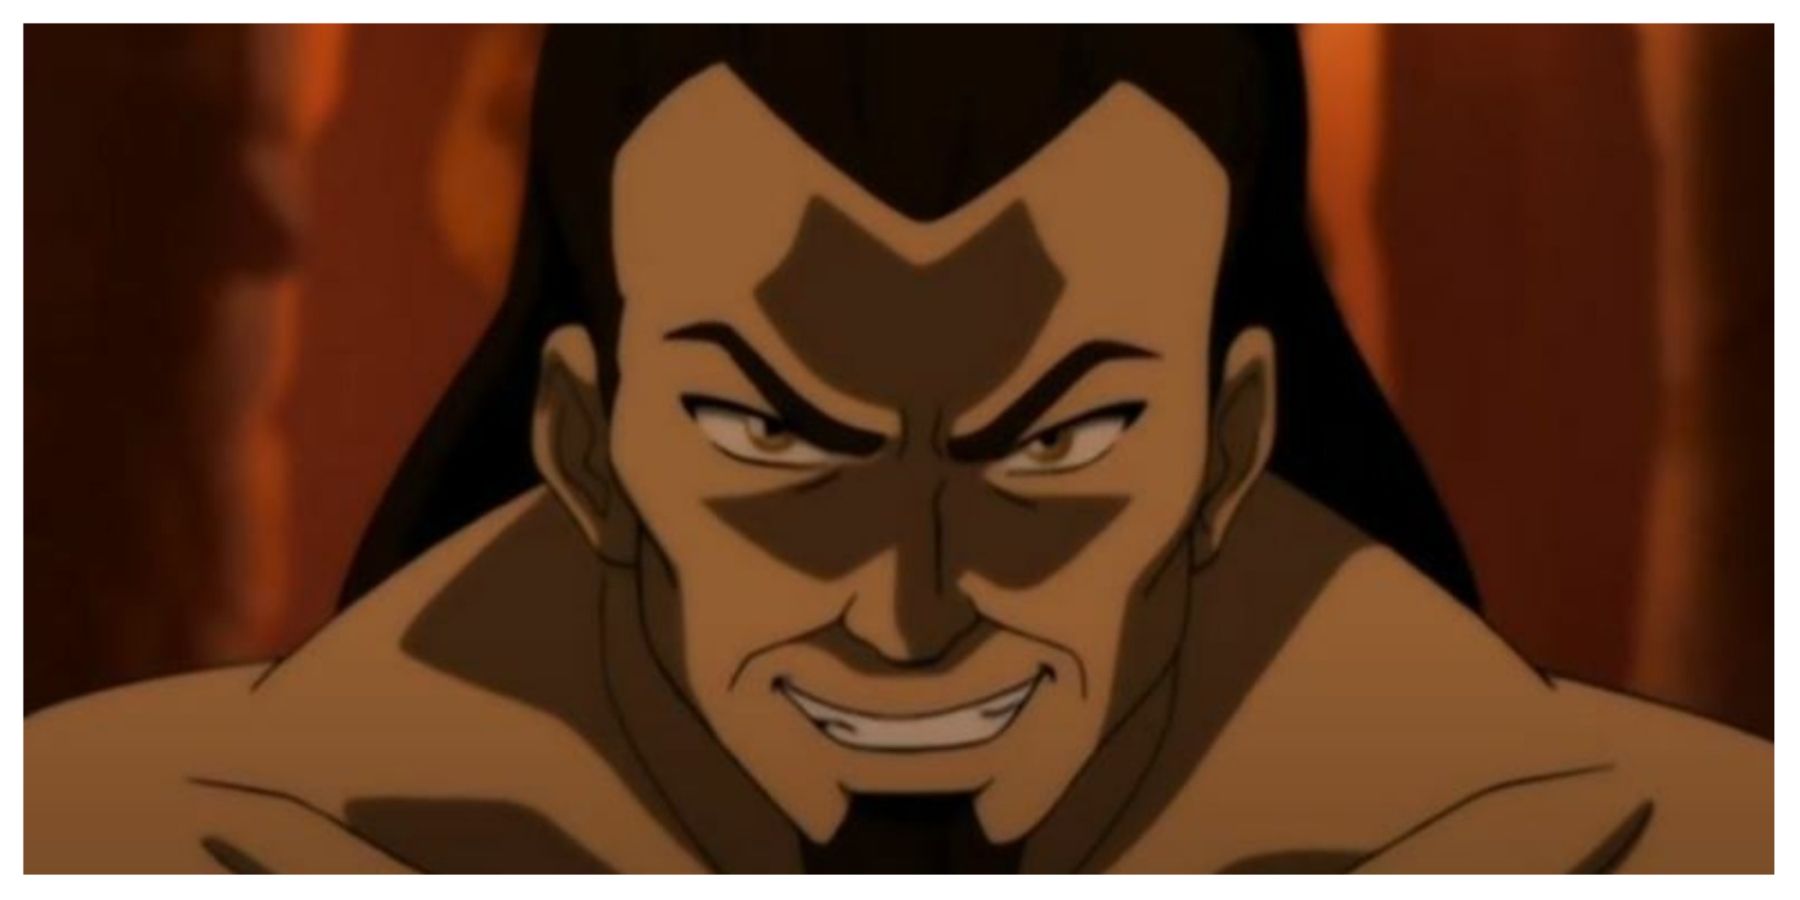 Fire Lord Ozai Smiling Ruthlessly